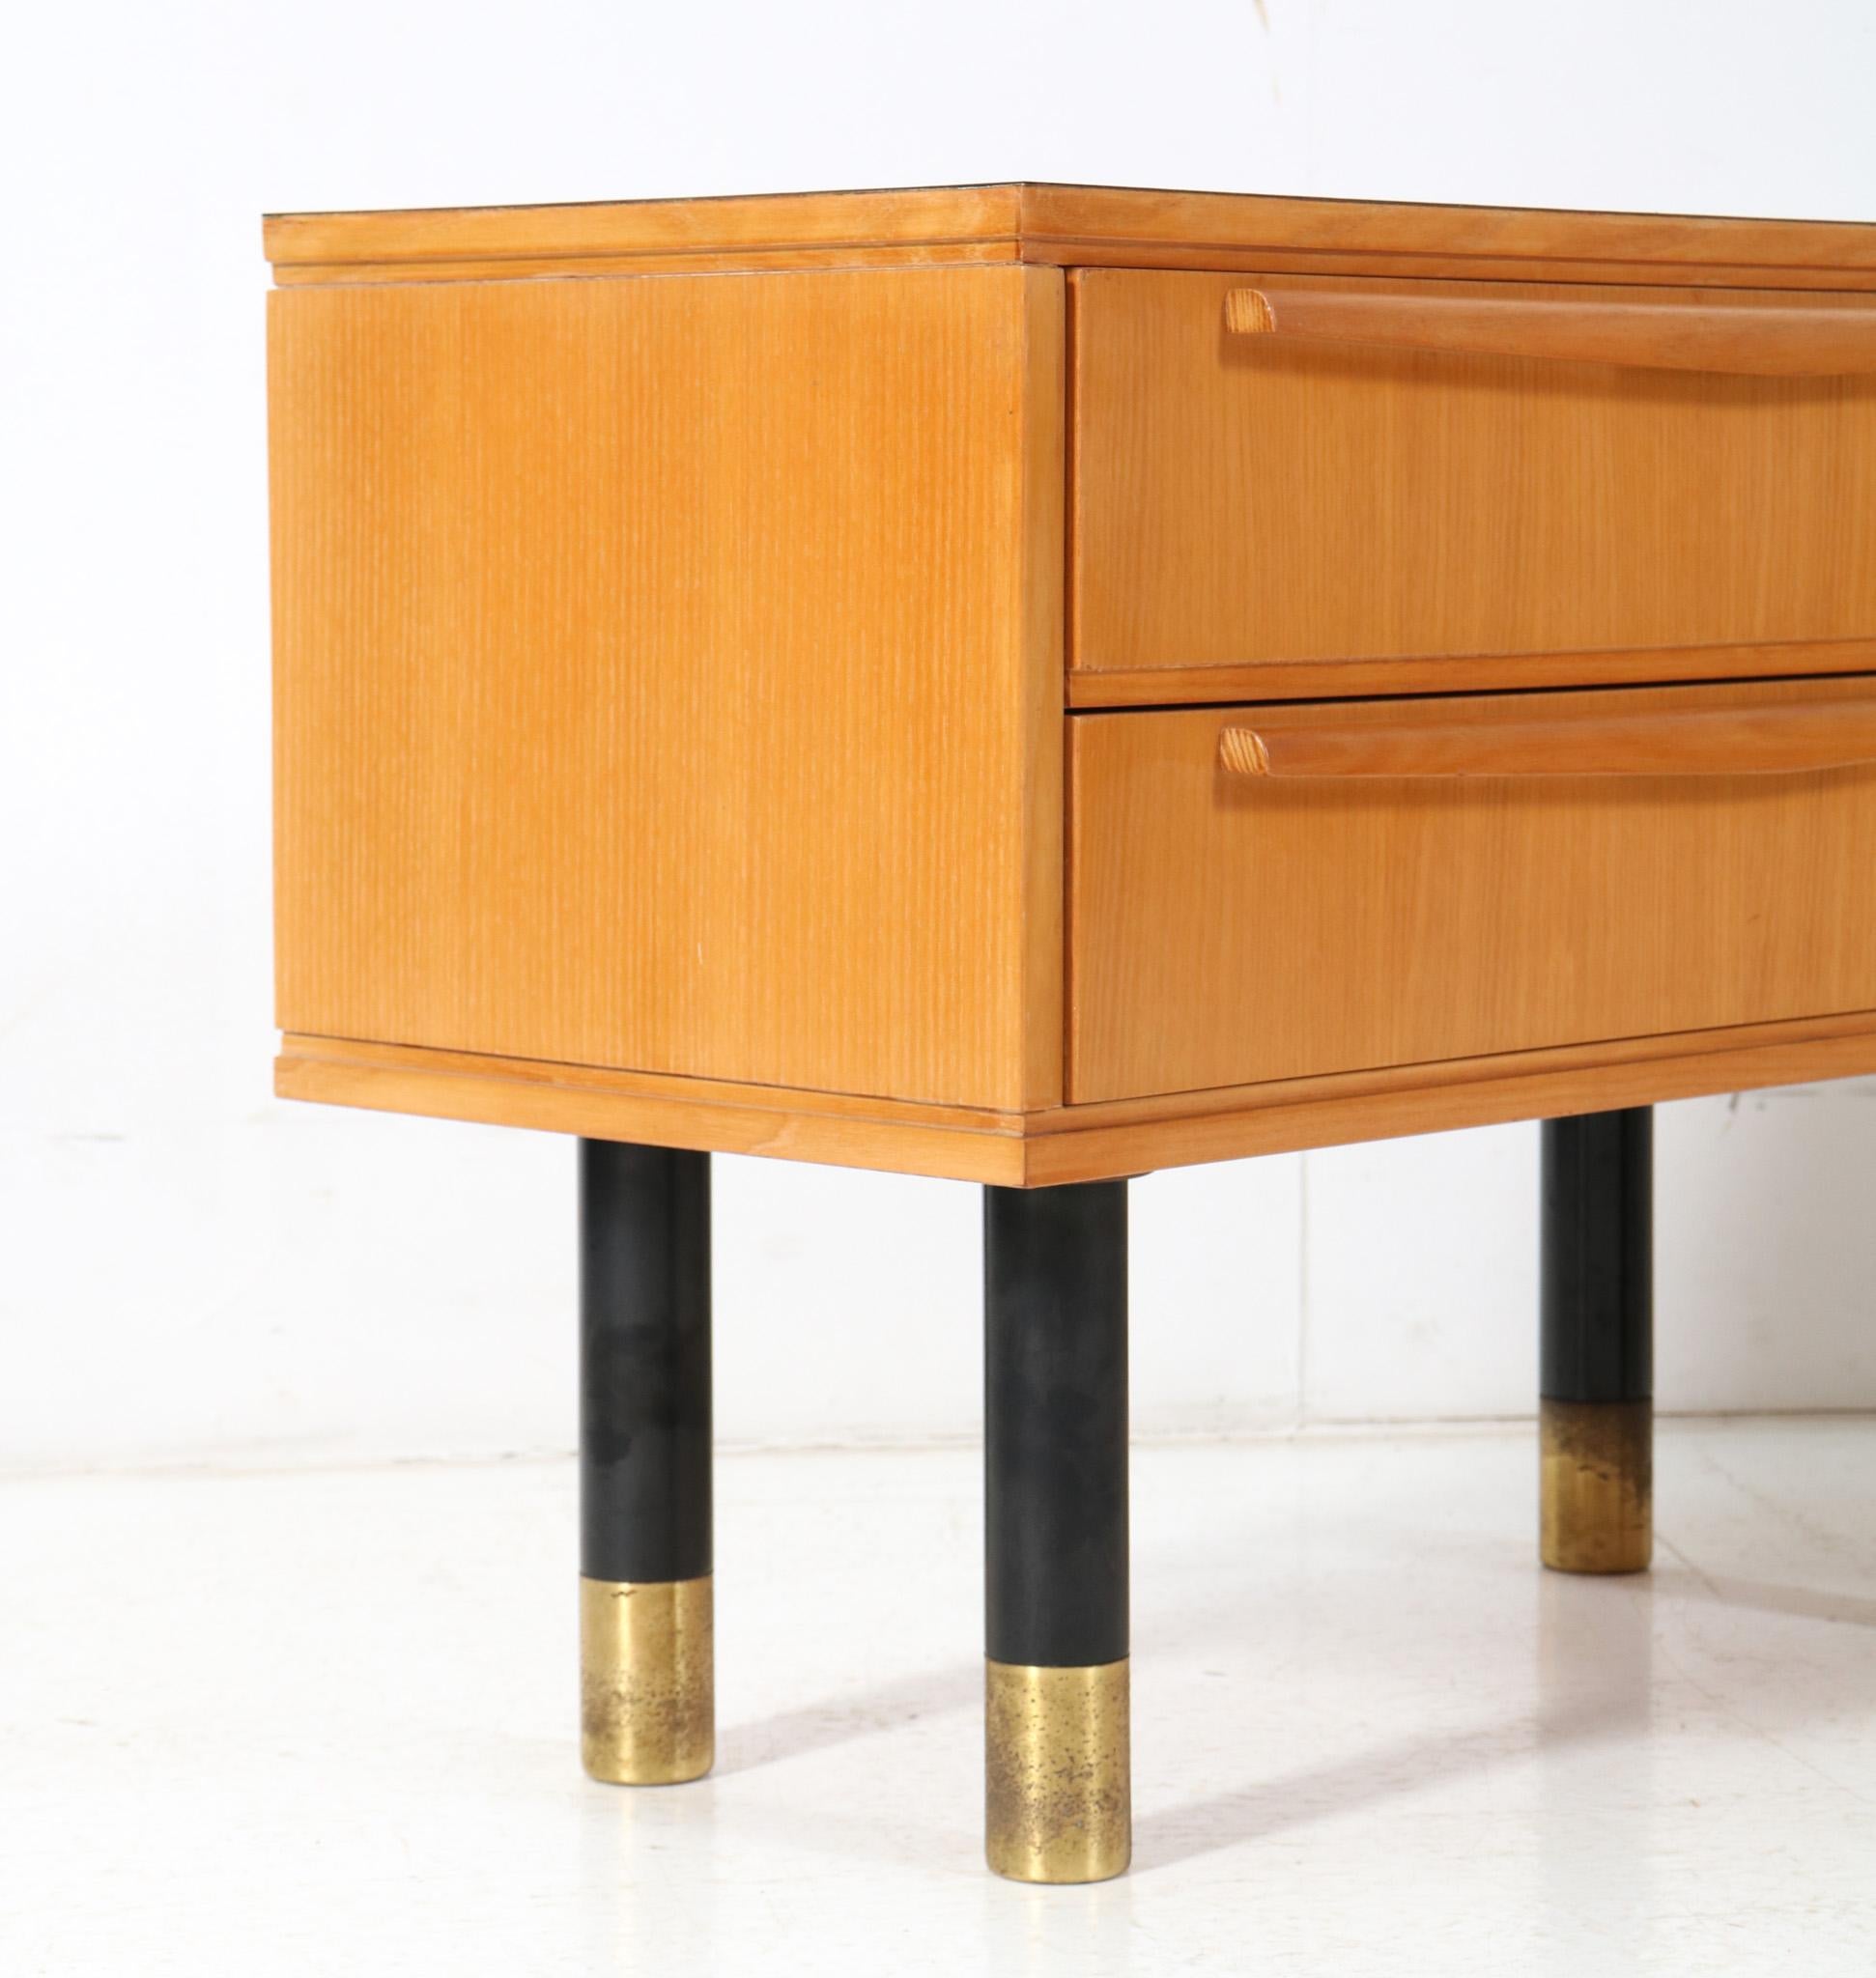 Two Ash Mid-Century Modern Nightstands or Bedside Tables, 1950s For Sale 1